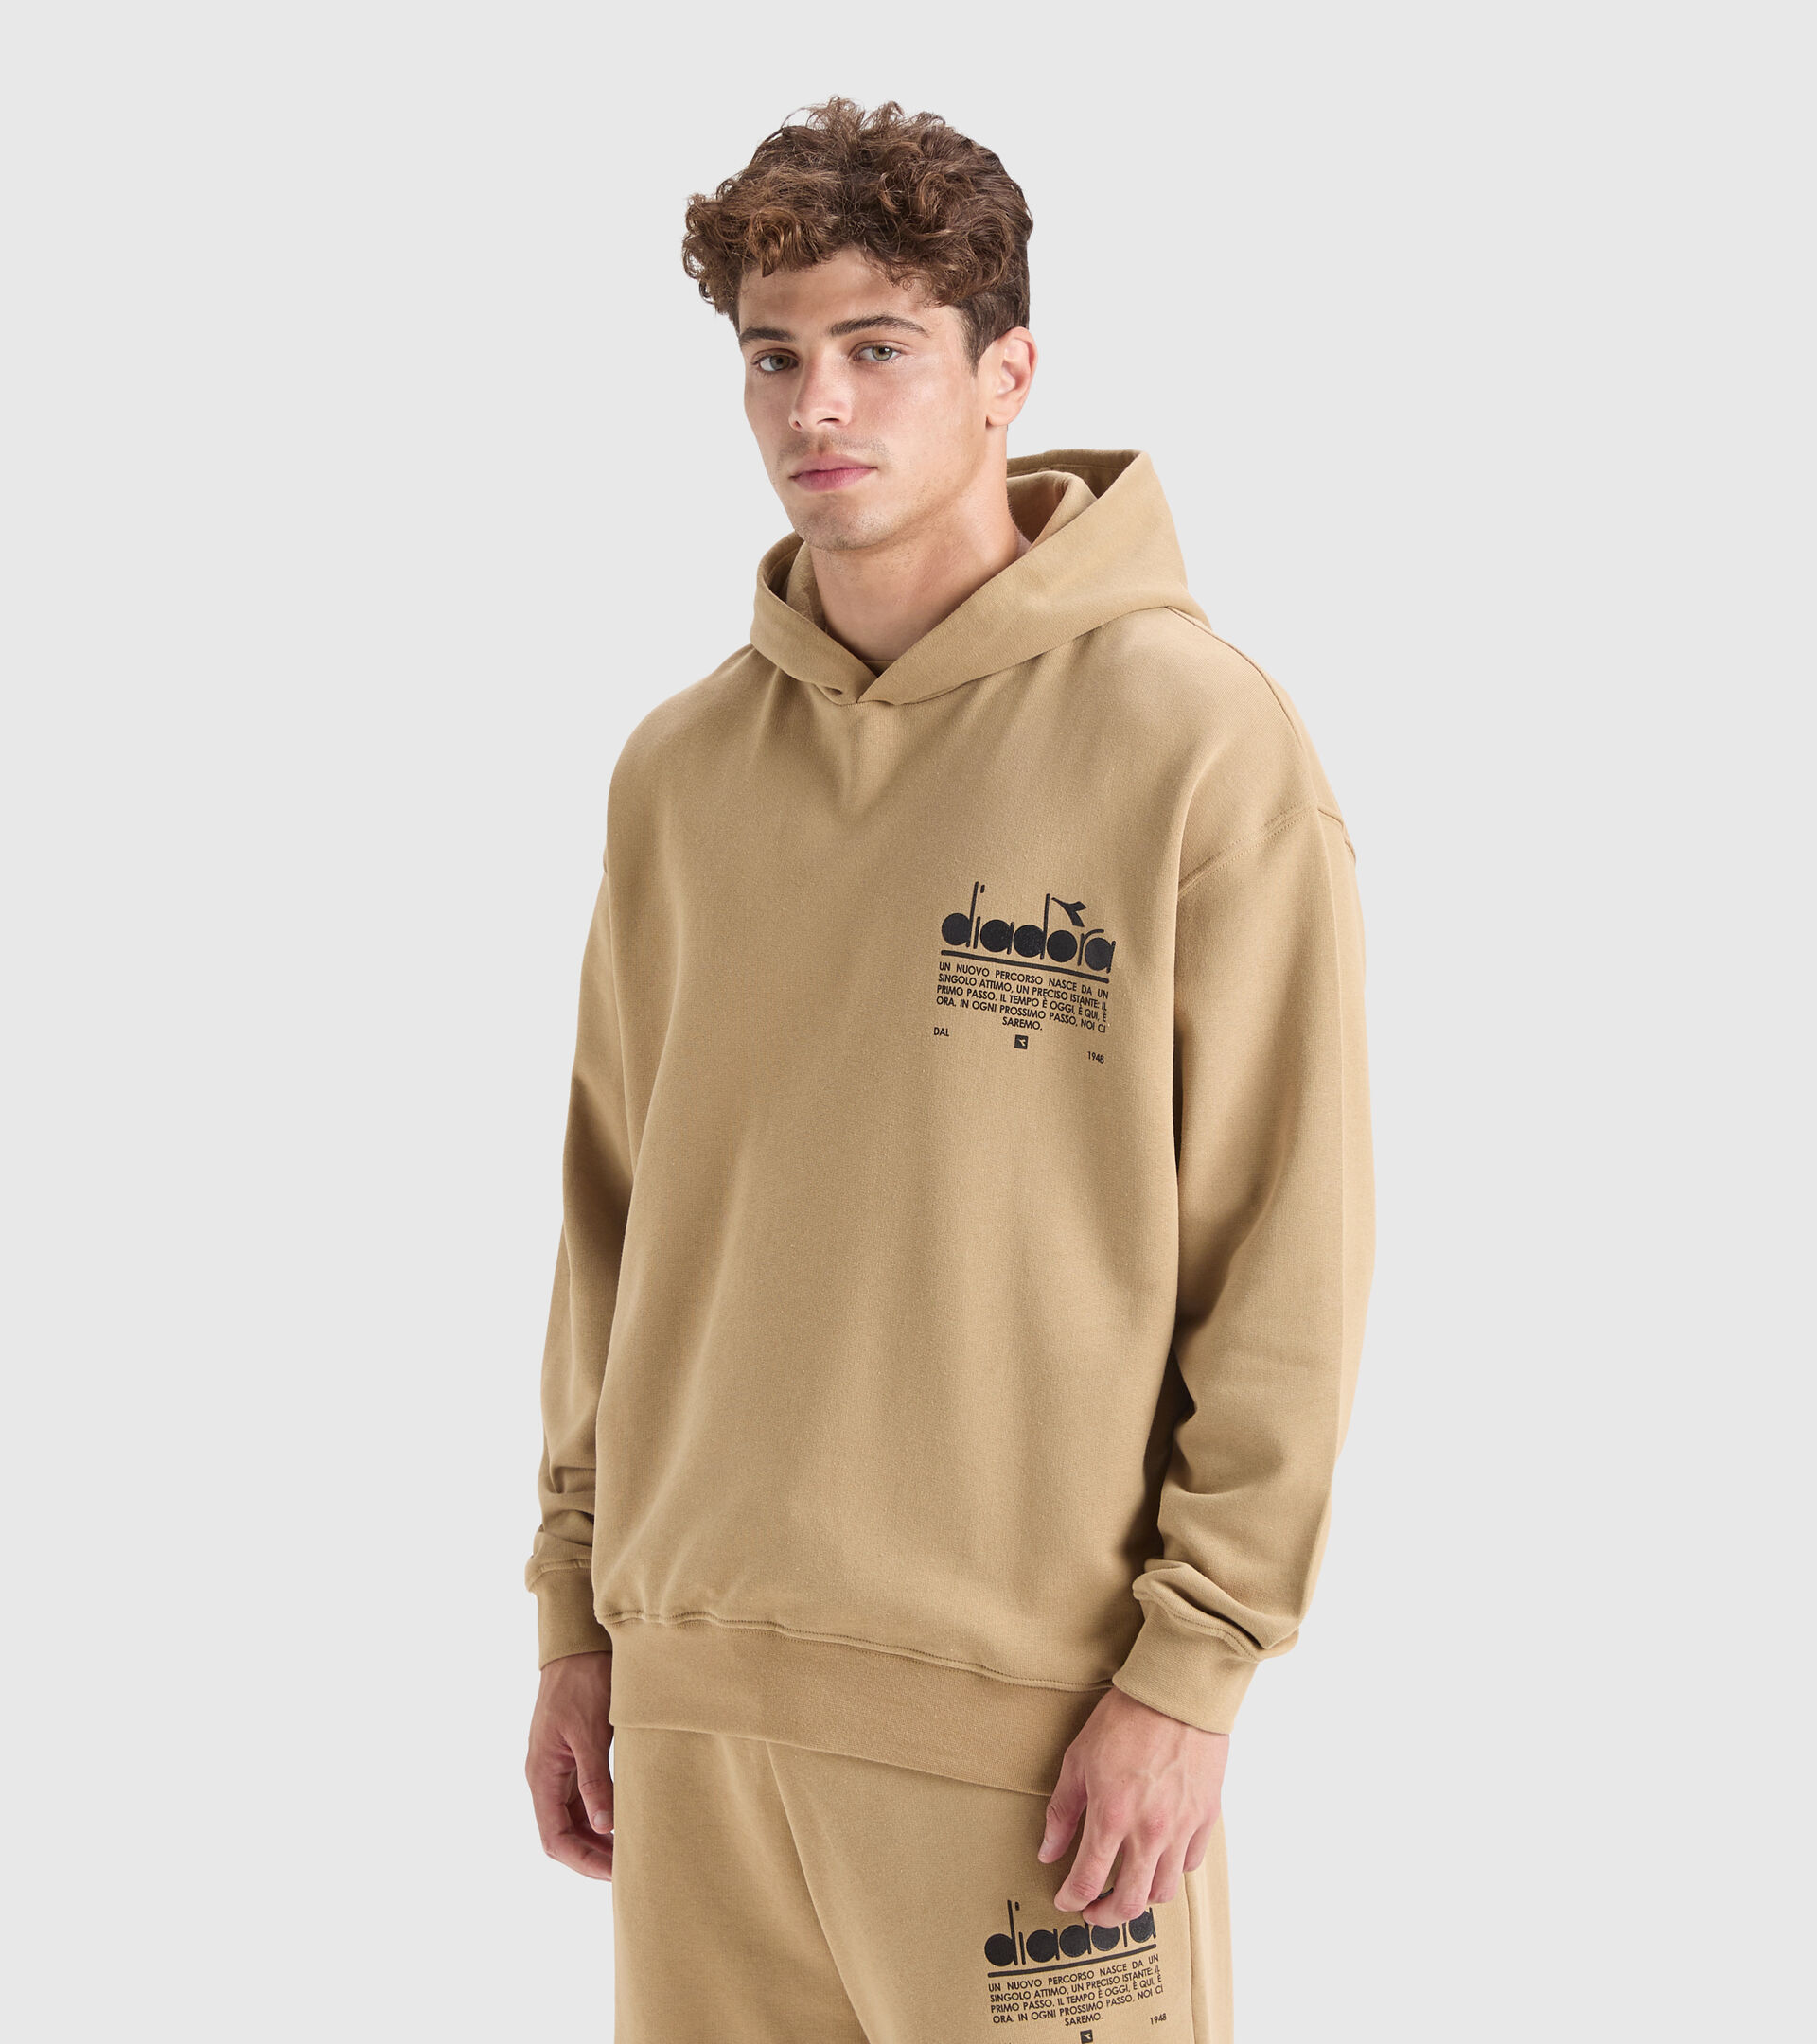 Tan Cotton Hoodie by Fear of God ESSENTIALS on Sale